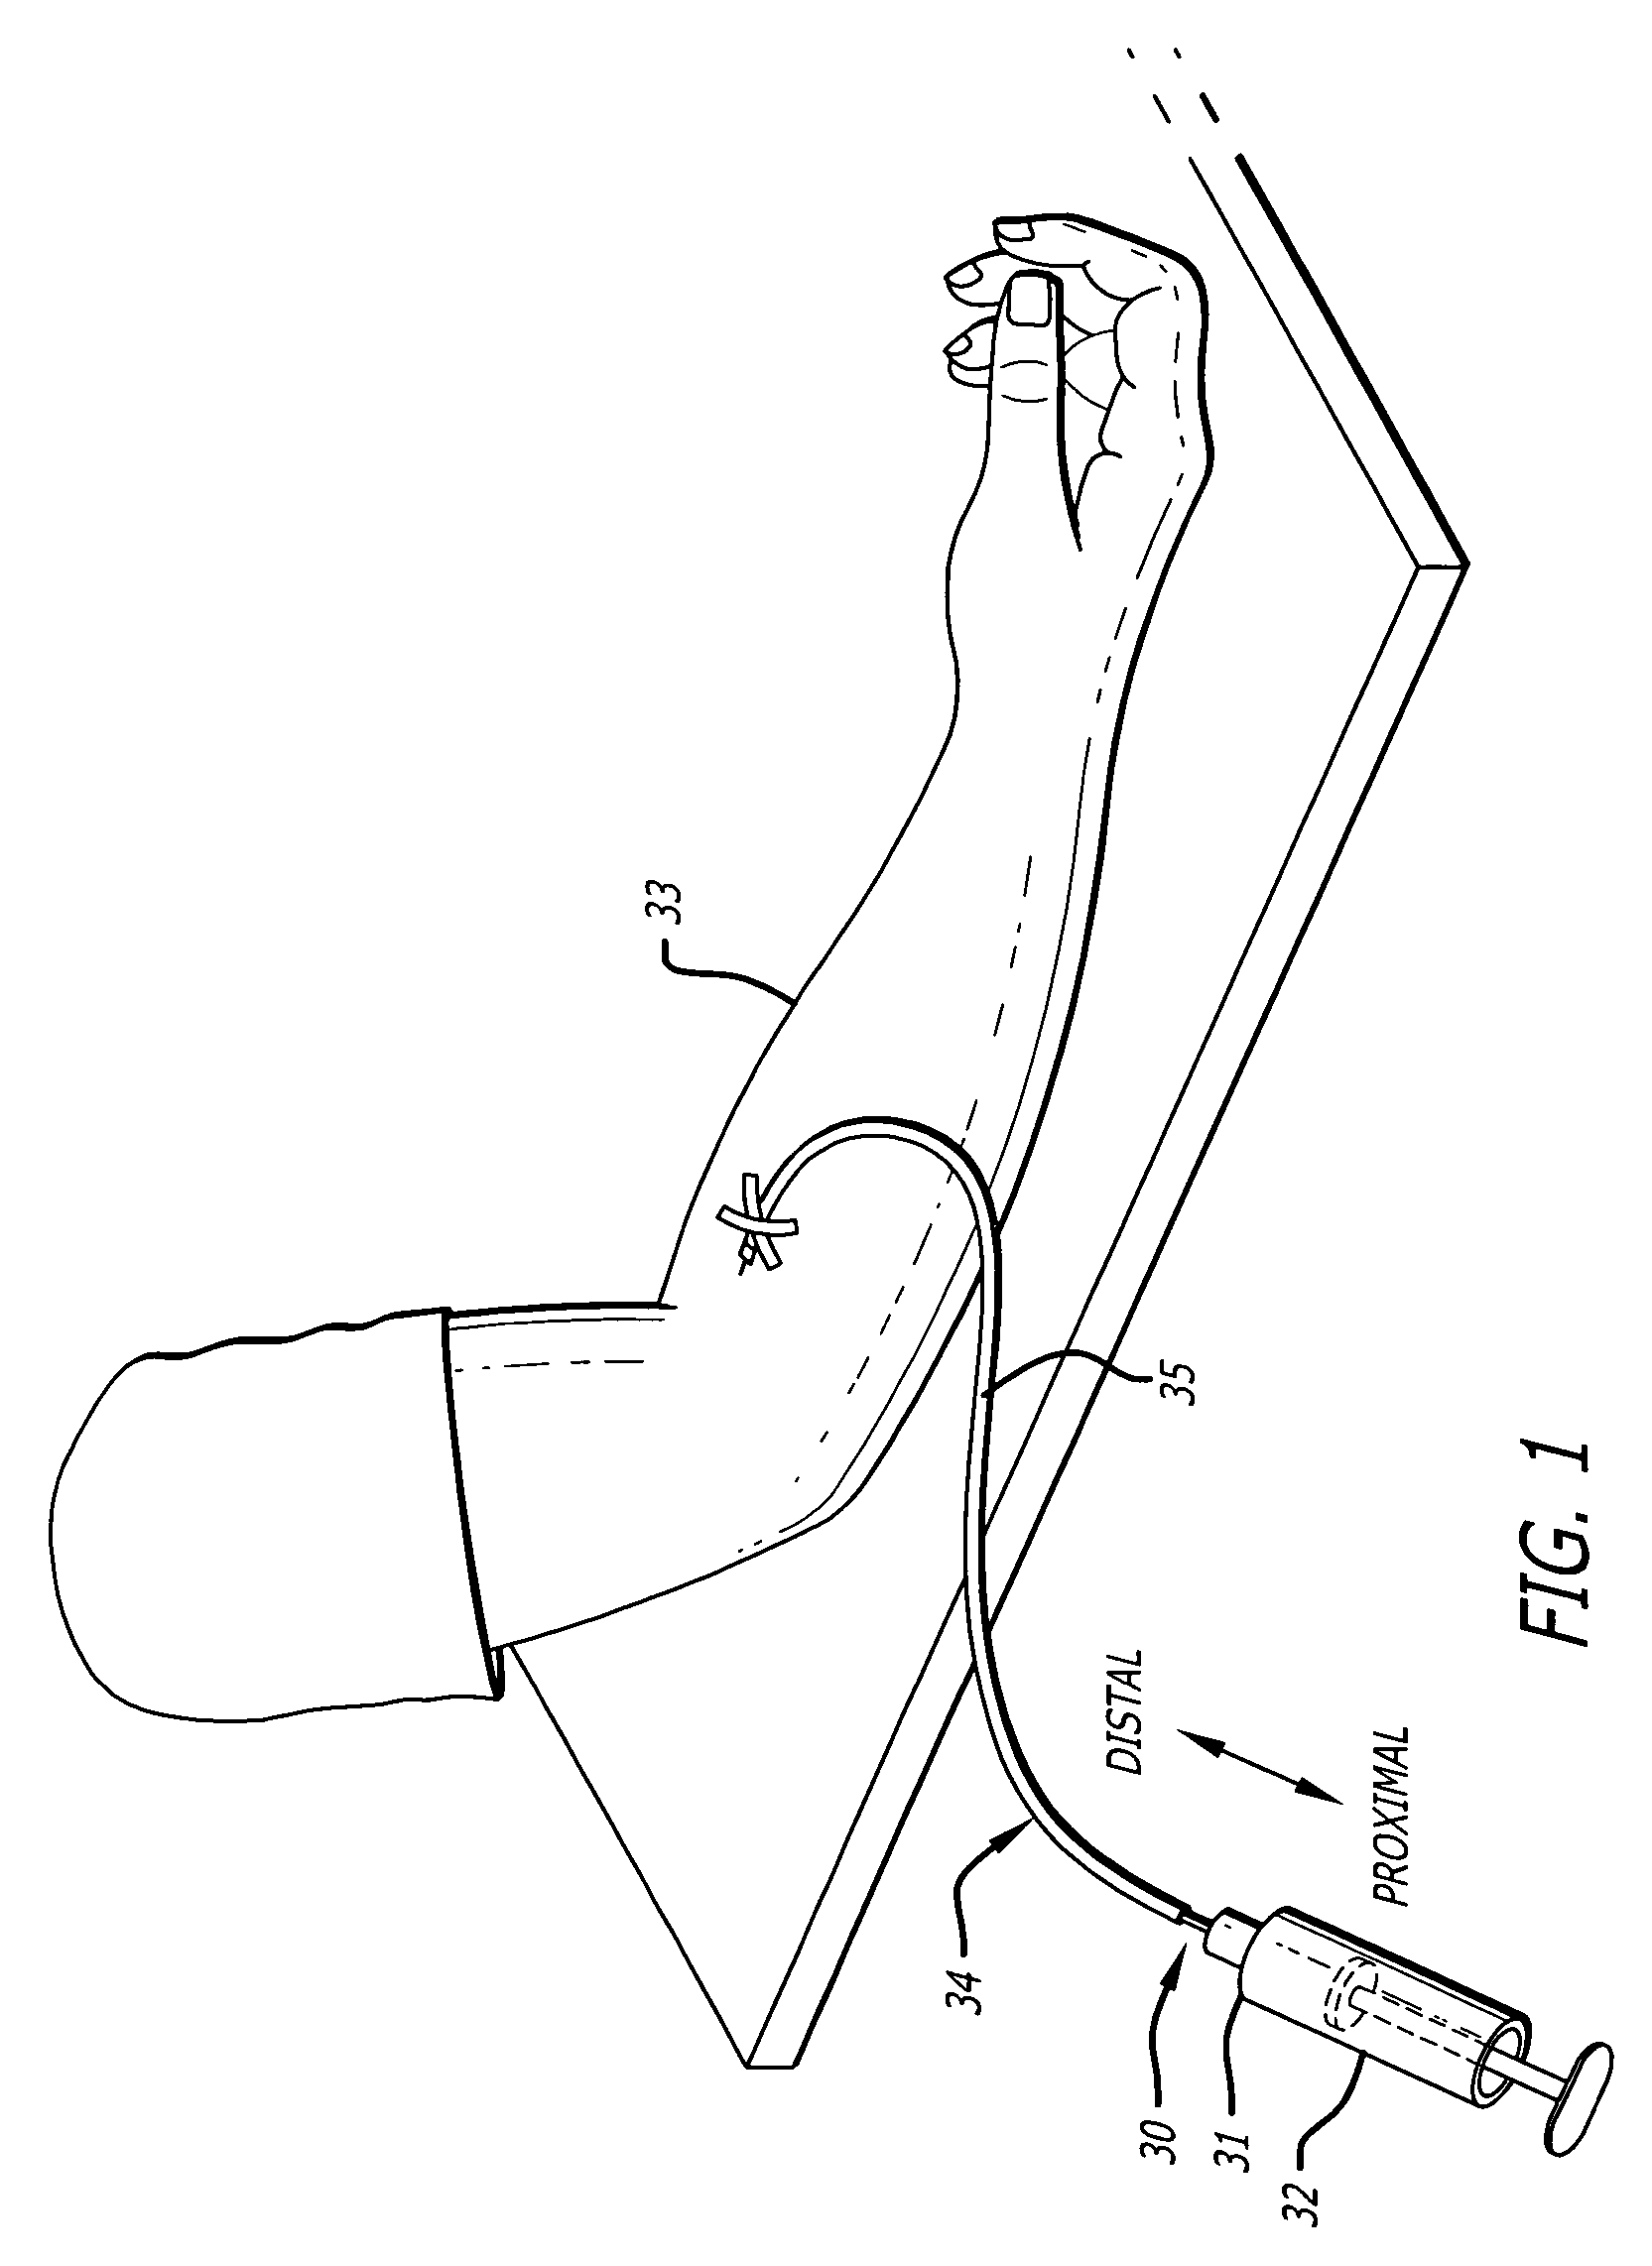 Self-sealing male connector device with collapsible body